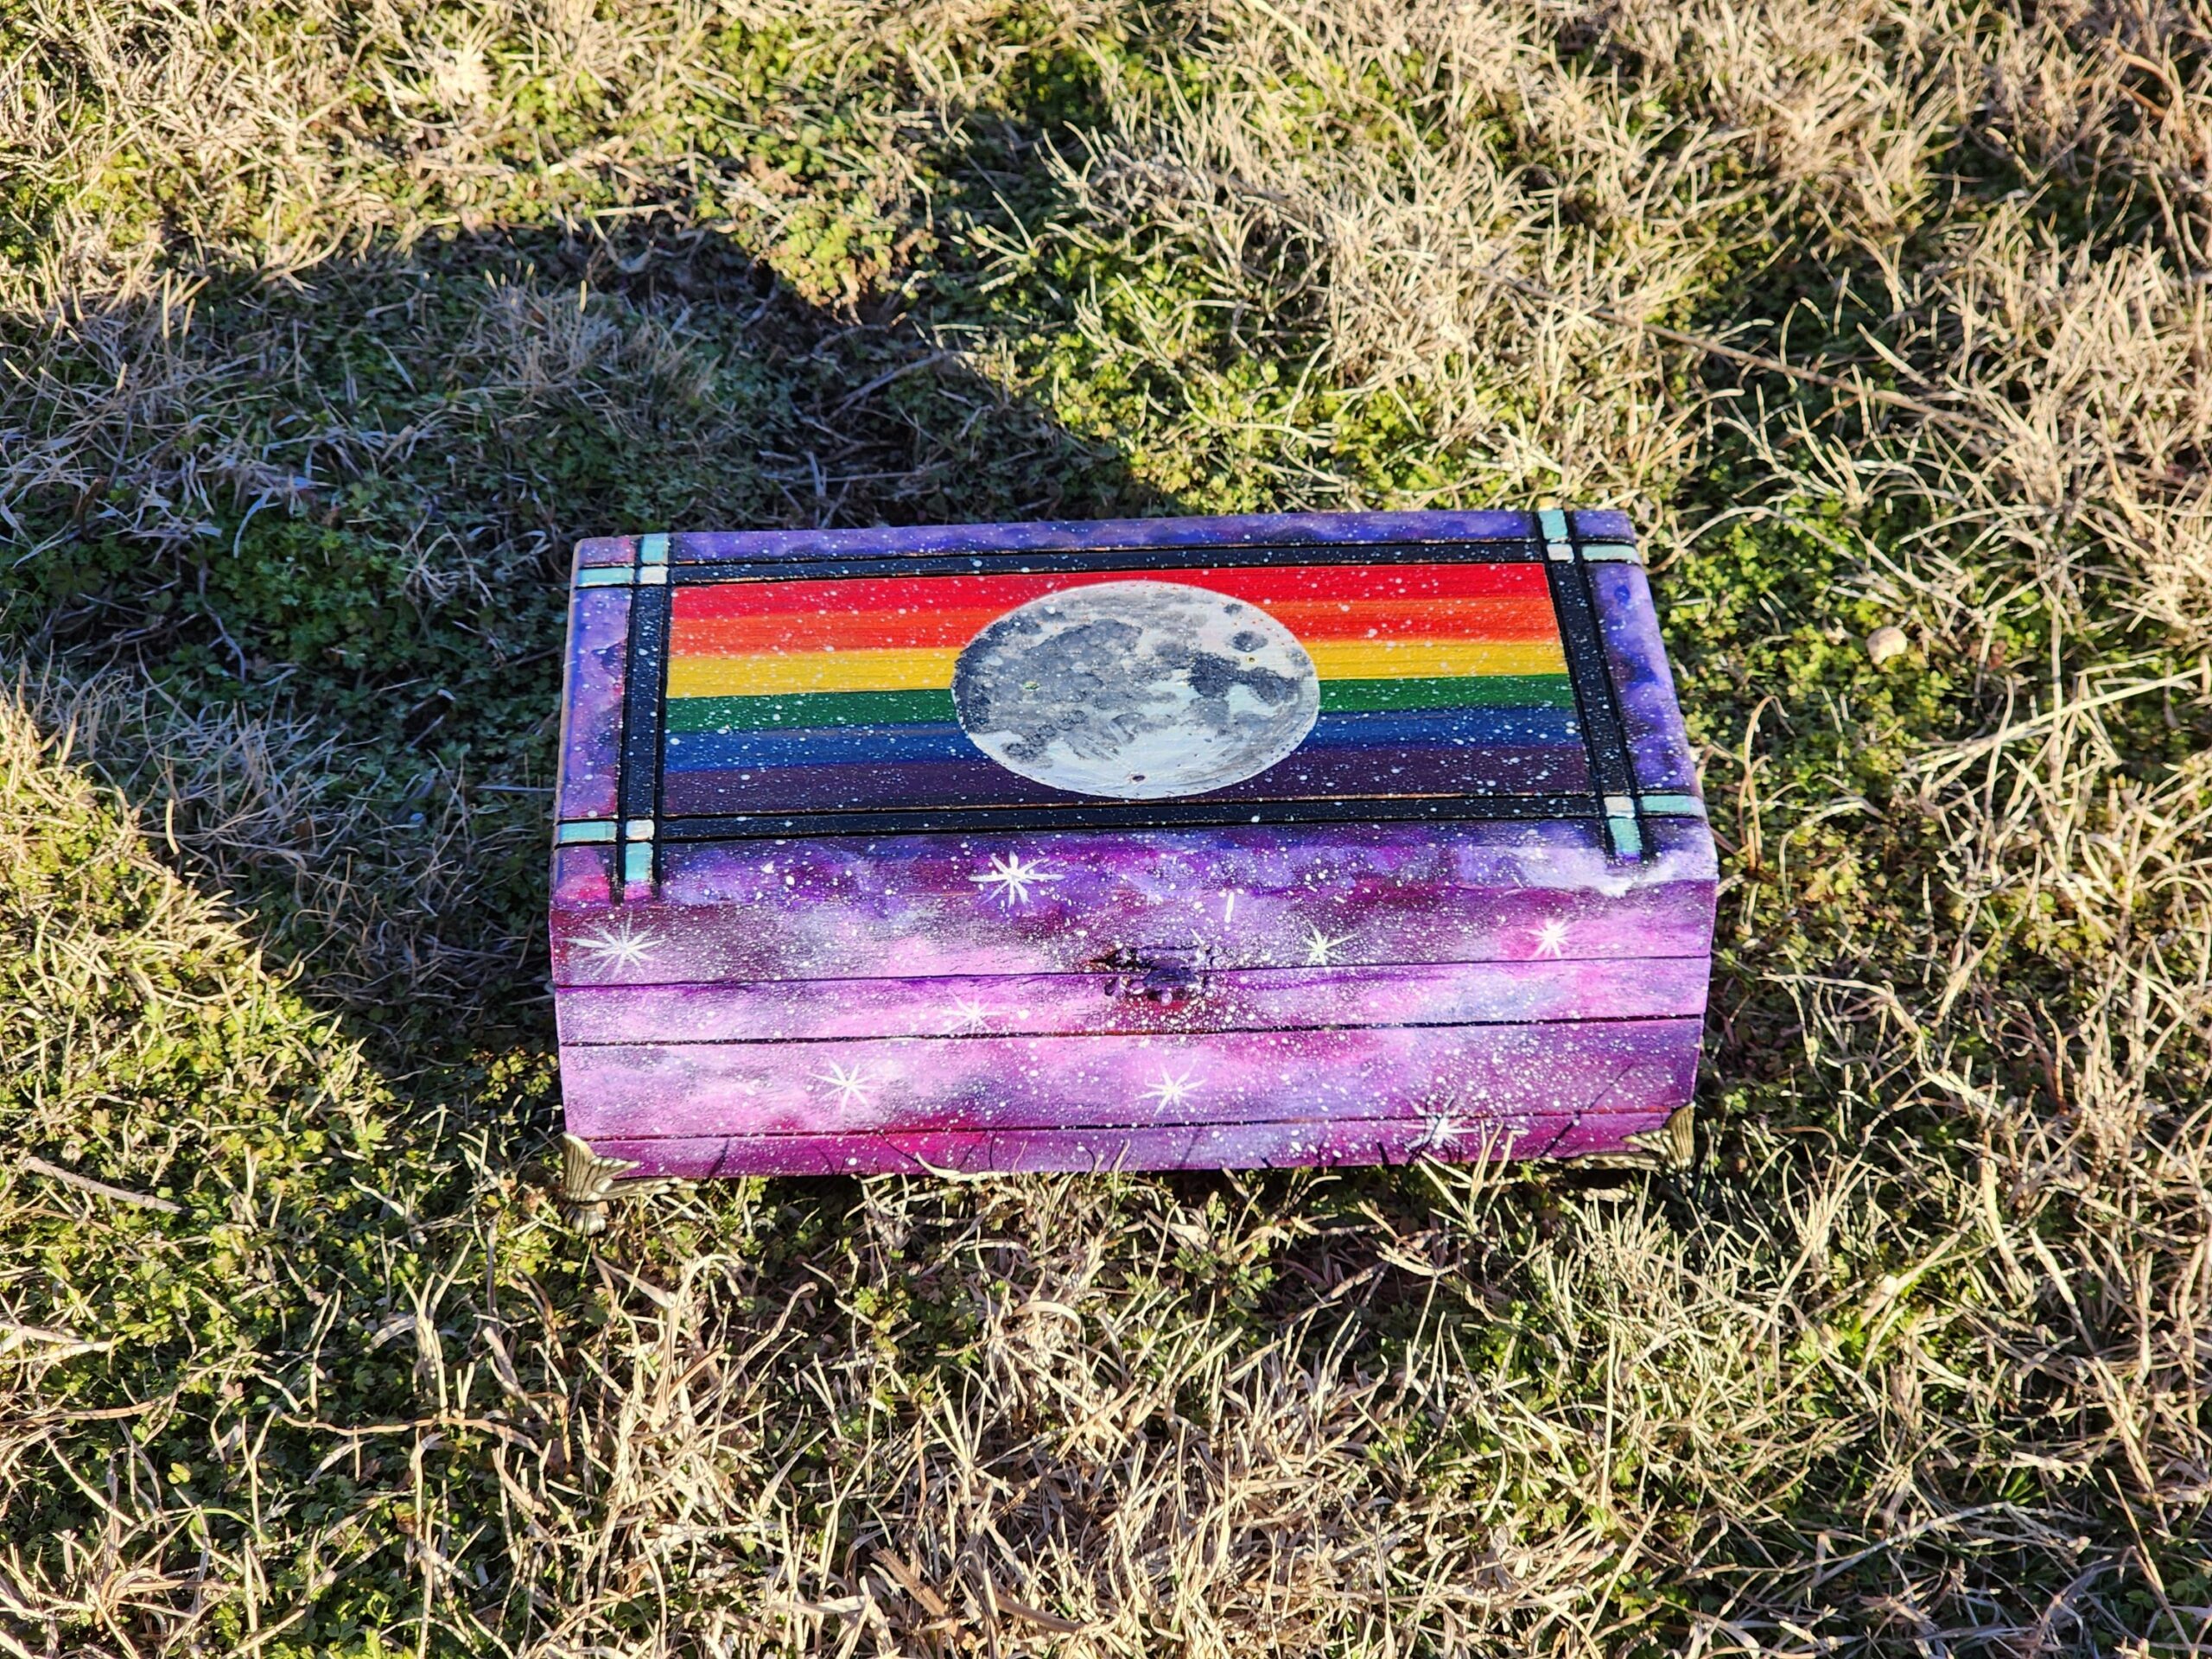 Repurposed antique wooden jewelry box with original design of moon and a galaxy with a rainbow design. Original lock clasp and antique brass feet.